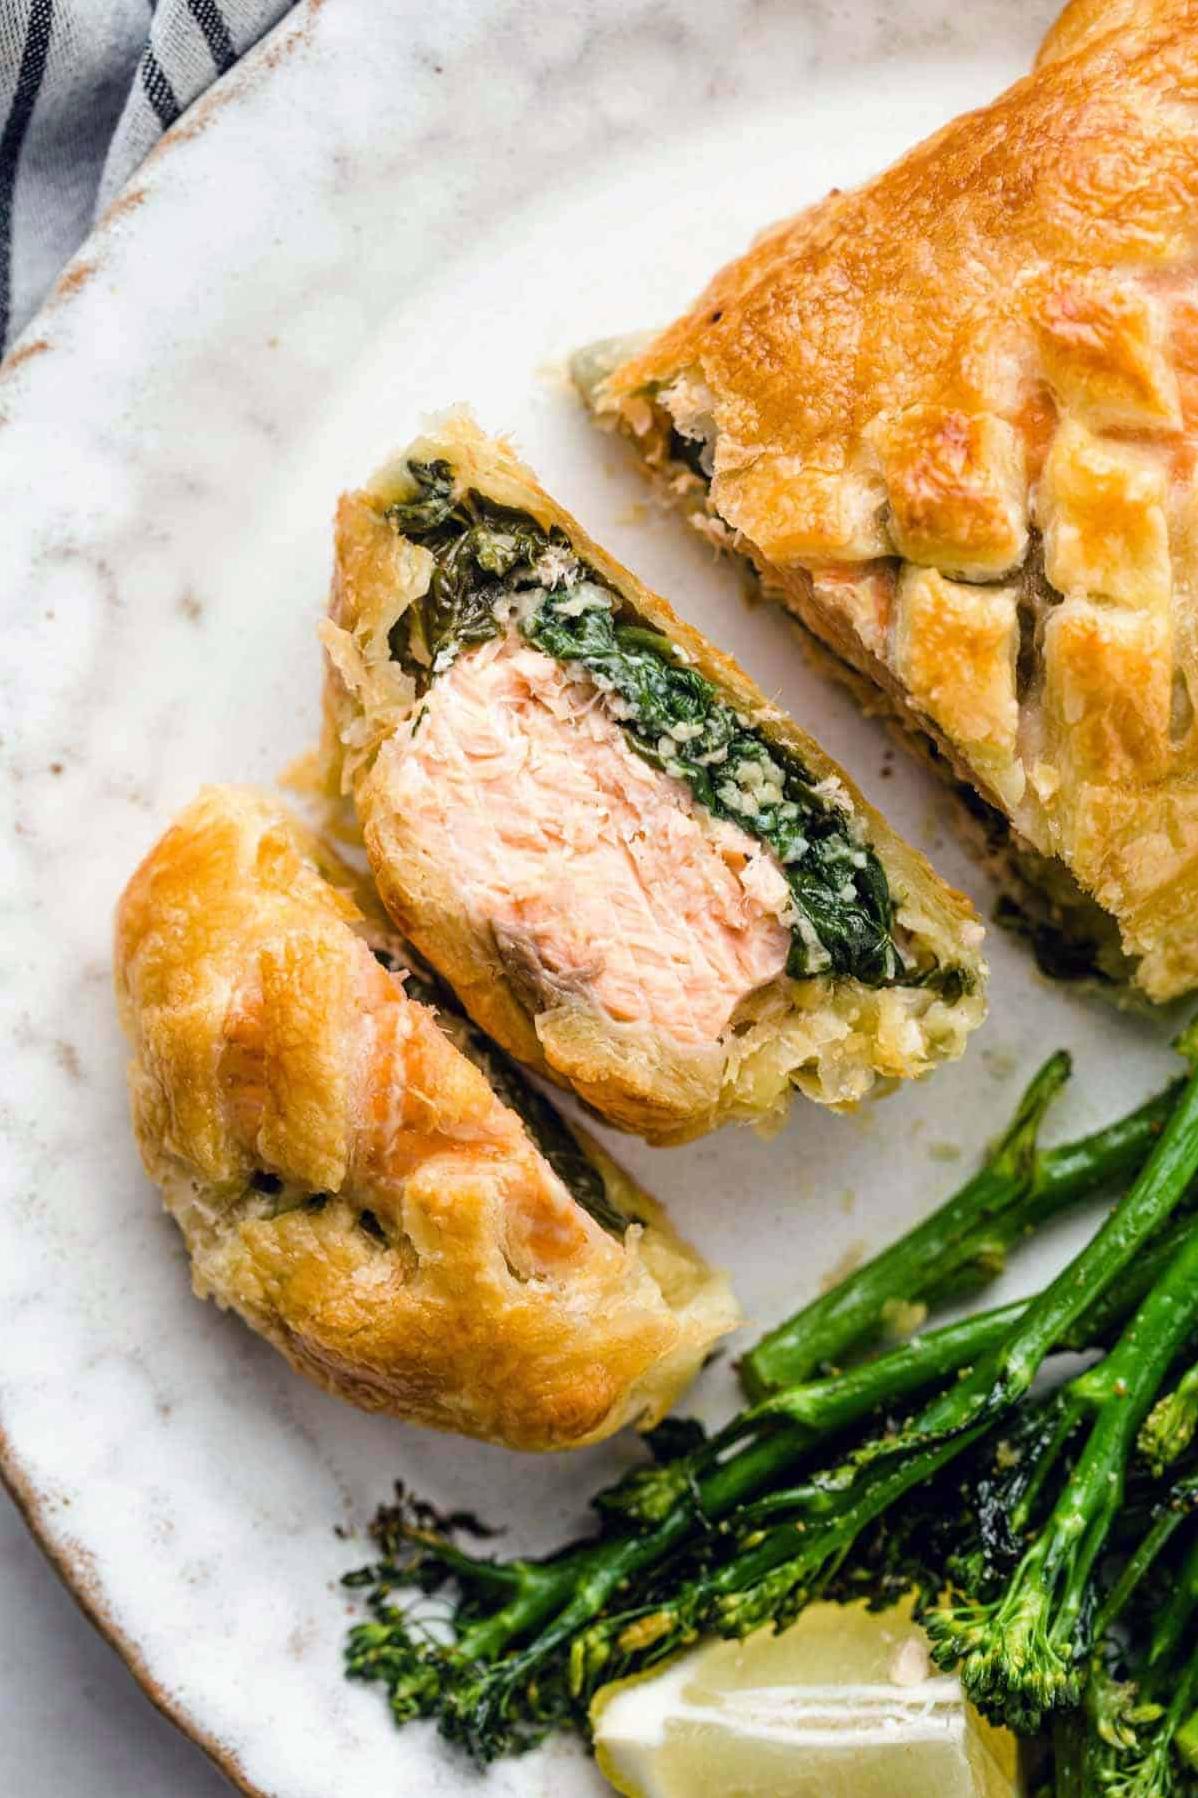  Salmon, spinach, and buttery pastry- a stunning trio!